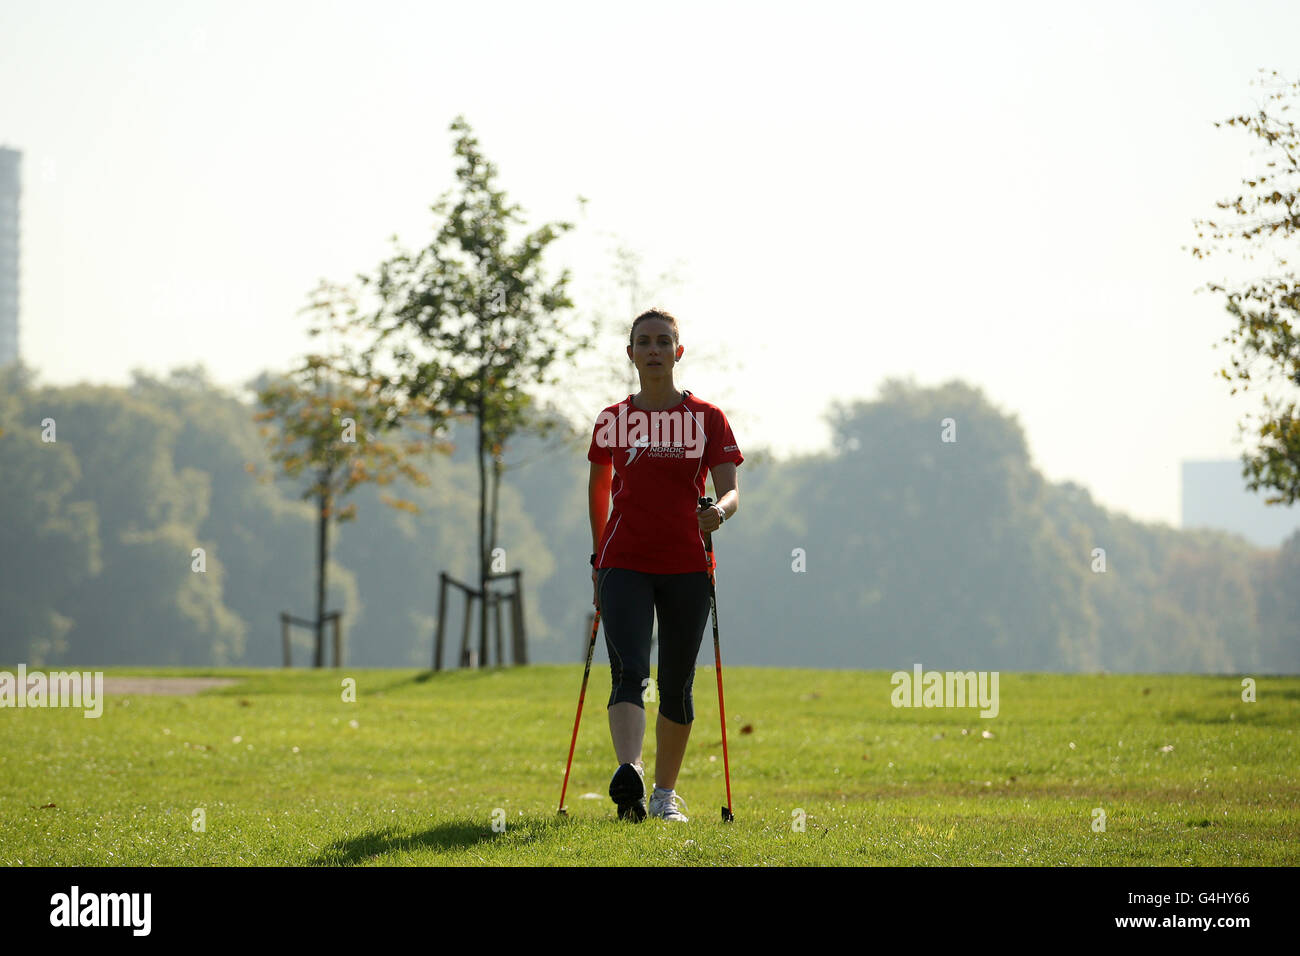 Delegate Tatiana Novaes at the annual INWA (International Nordic Walking Federation) convention in London's Hyde Park. Stock Photo